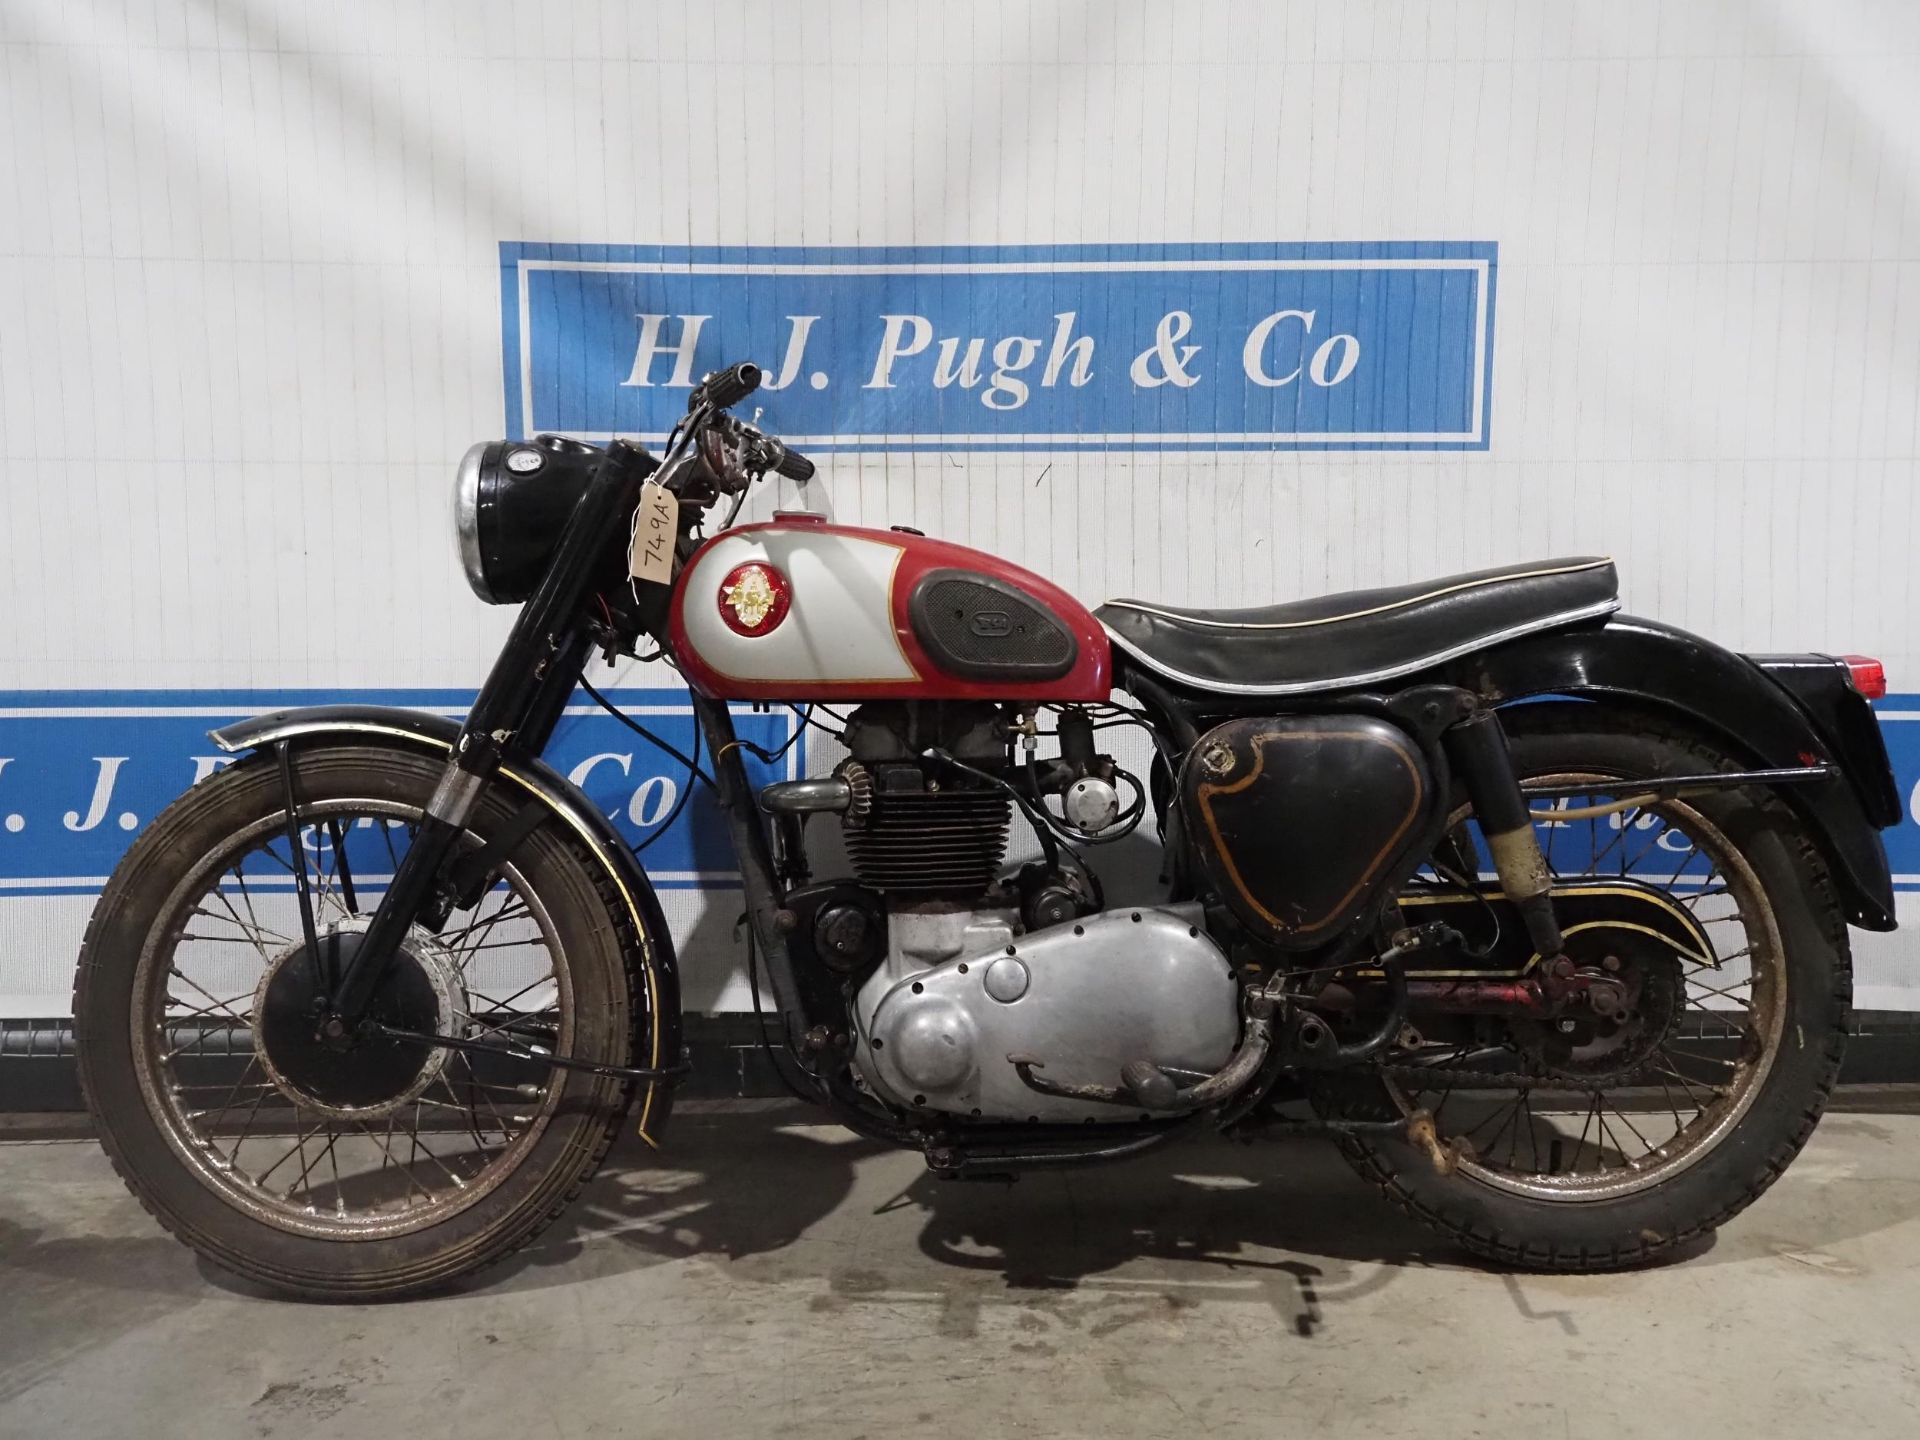 BSA A10 650 motorcycle. 1959. Ran well when last used. Reg. 218 XVW. V5 - Image 9 of 10